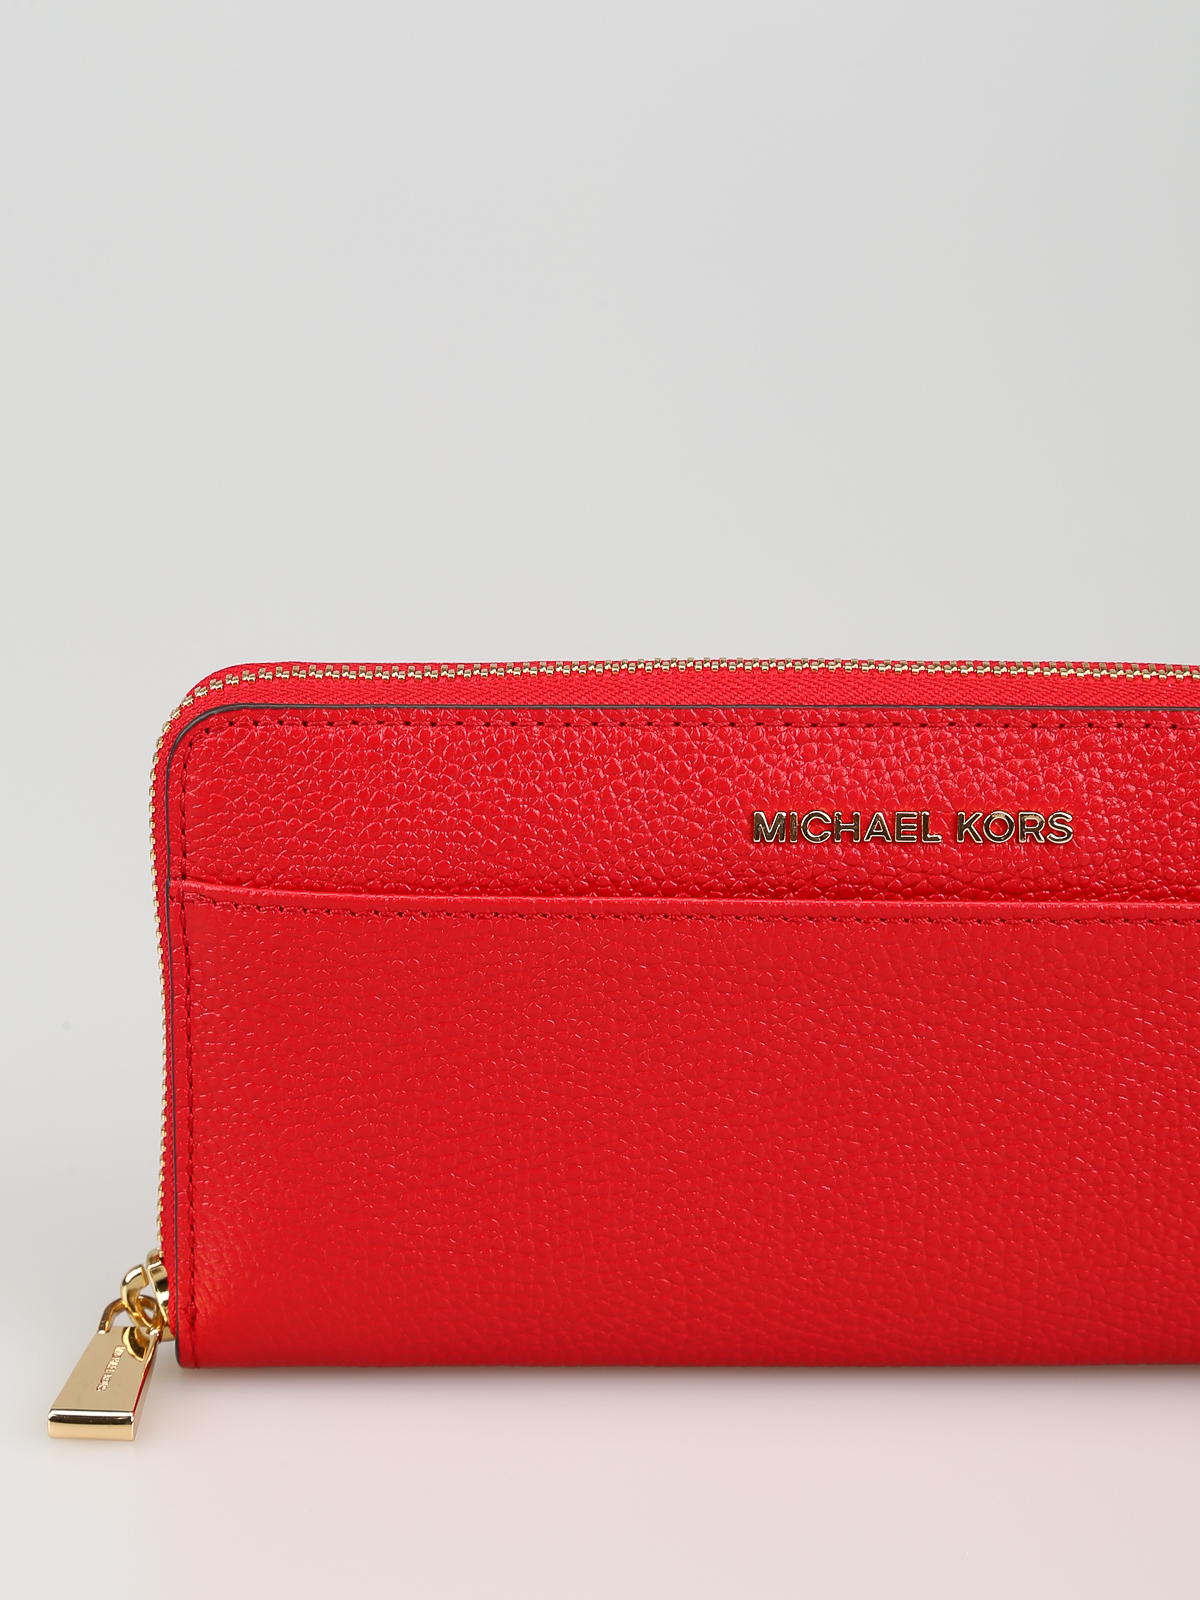 Wallets & purses Michael Kors - Bright red zip around continental wallet -  32S7GM9E9L683